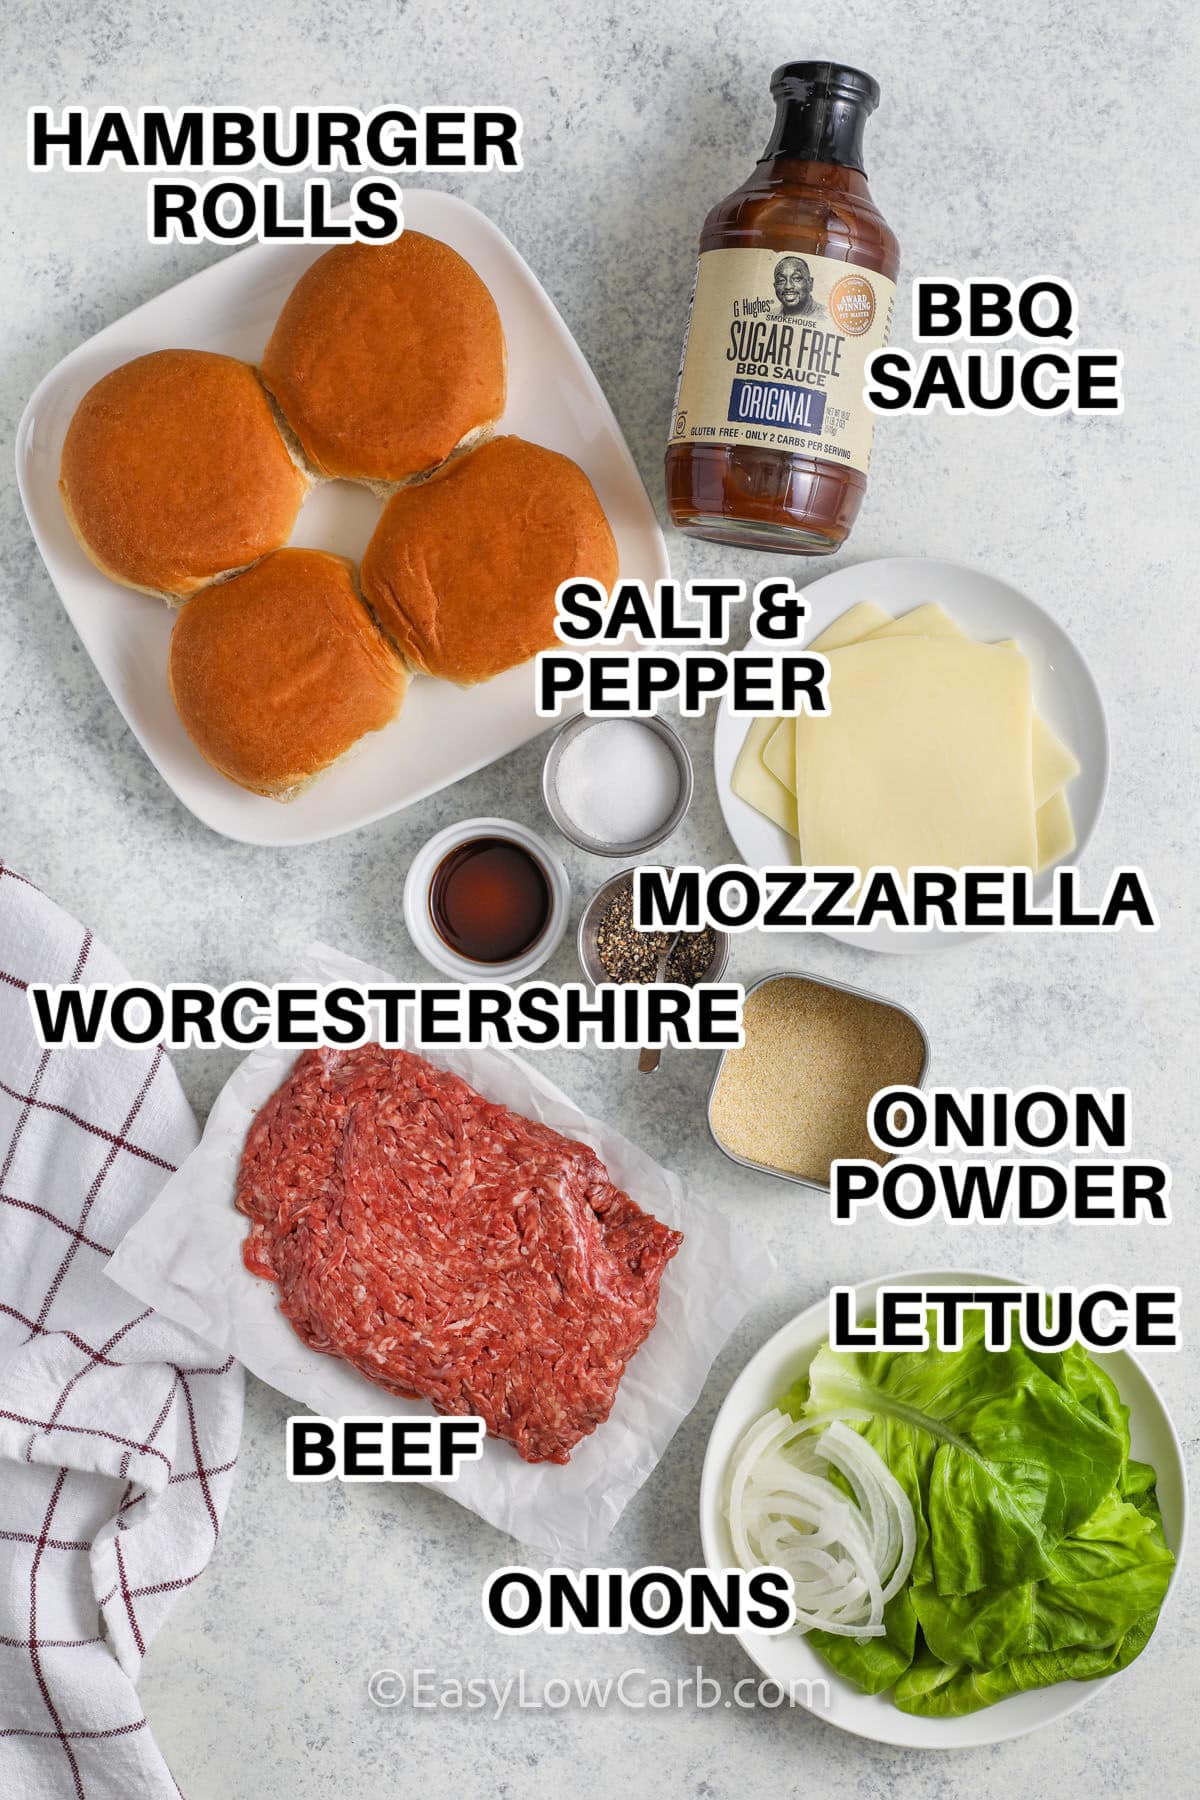 hamburger rolls , bbq sauce , mozzarella , Worcestershire sauce , onion powder , beef , onions , lettuce , salt and pepper with labels to make Stuffed Burgers